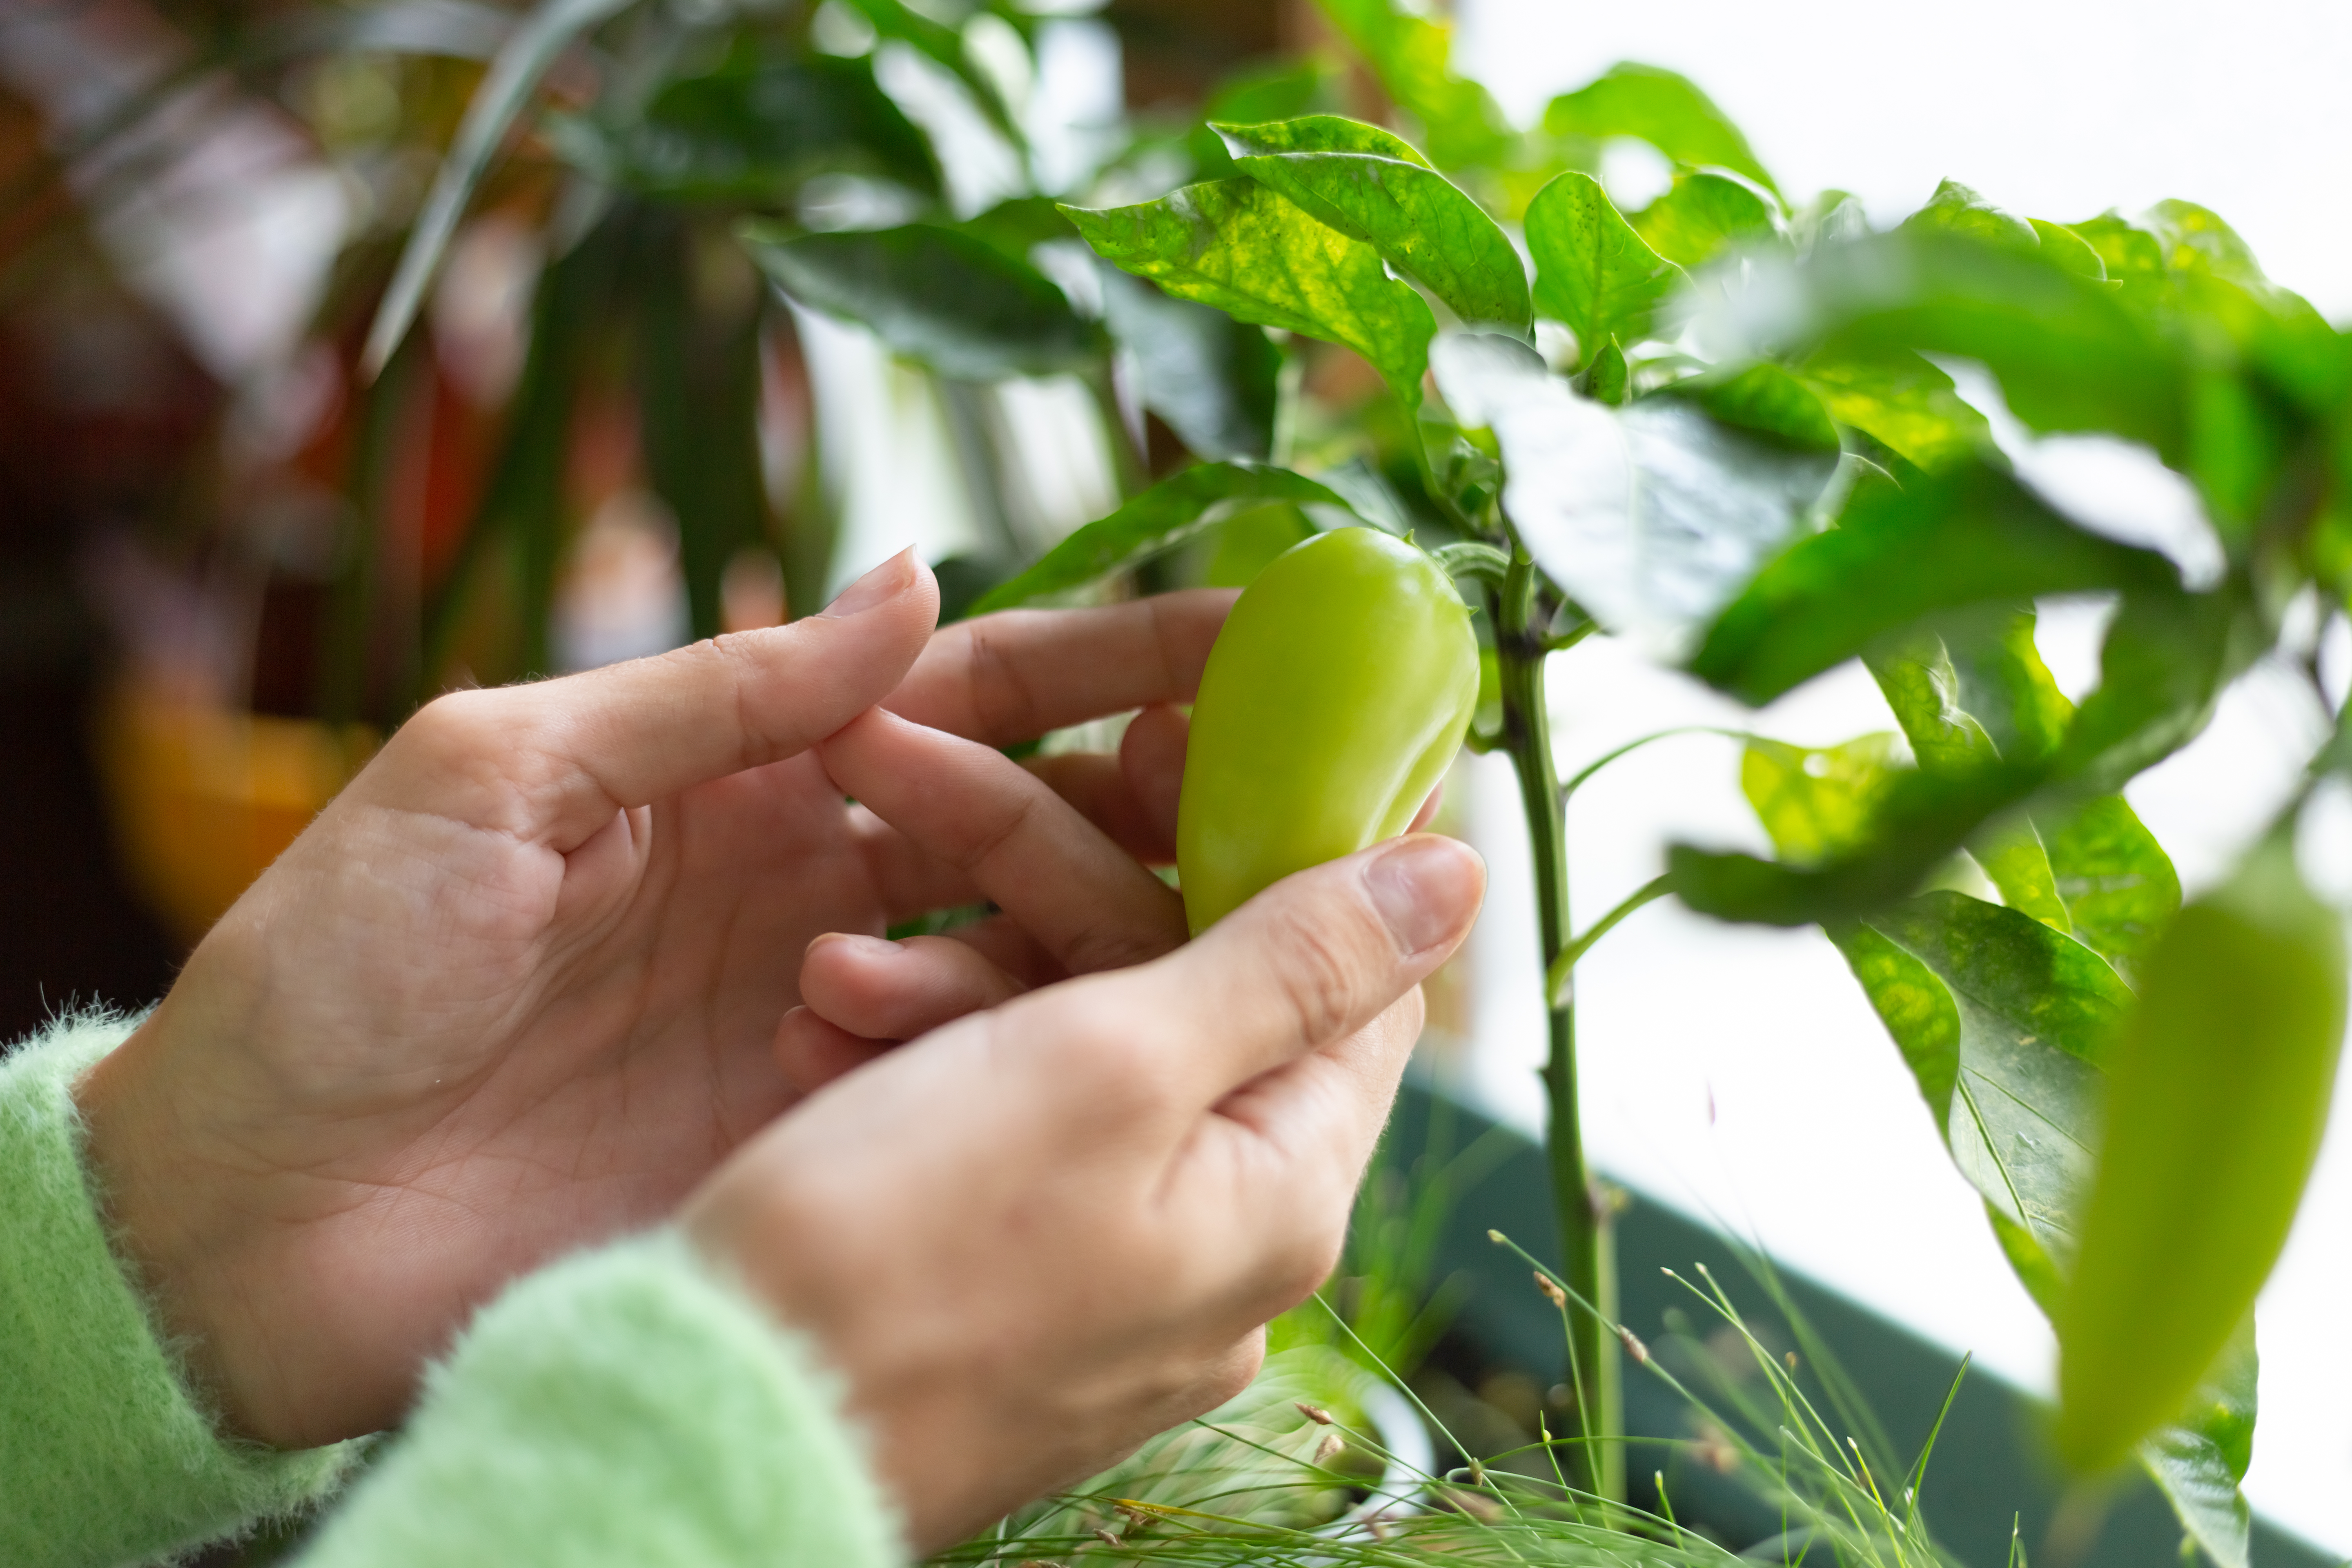 A pair of hands holding an unripe pepper on the plant